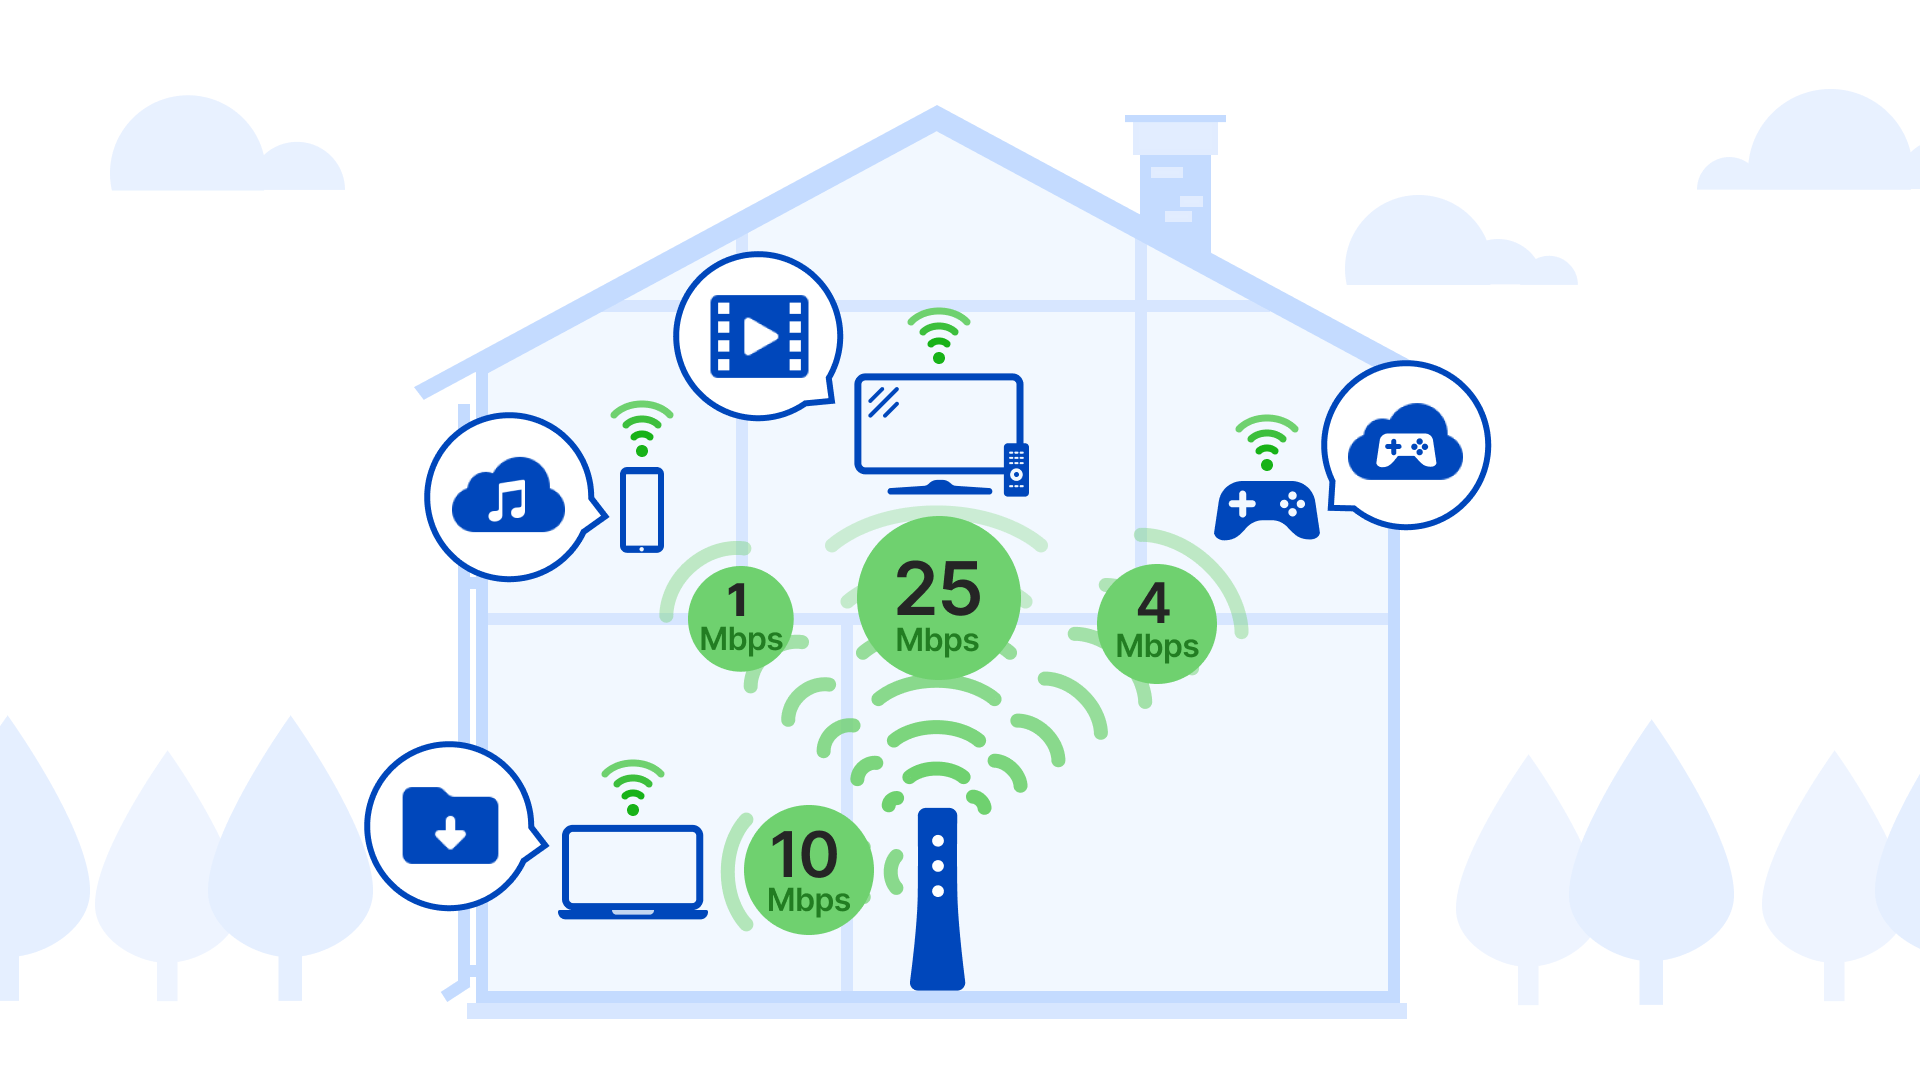 Illustration showing bandwidth requirements of various devices